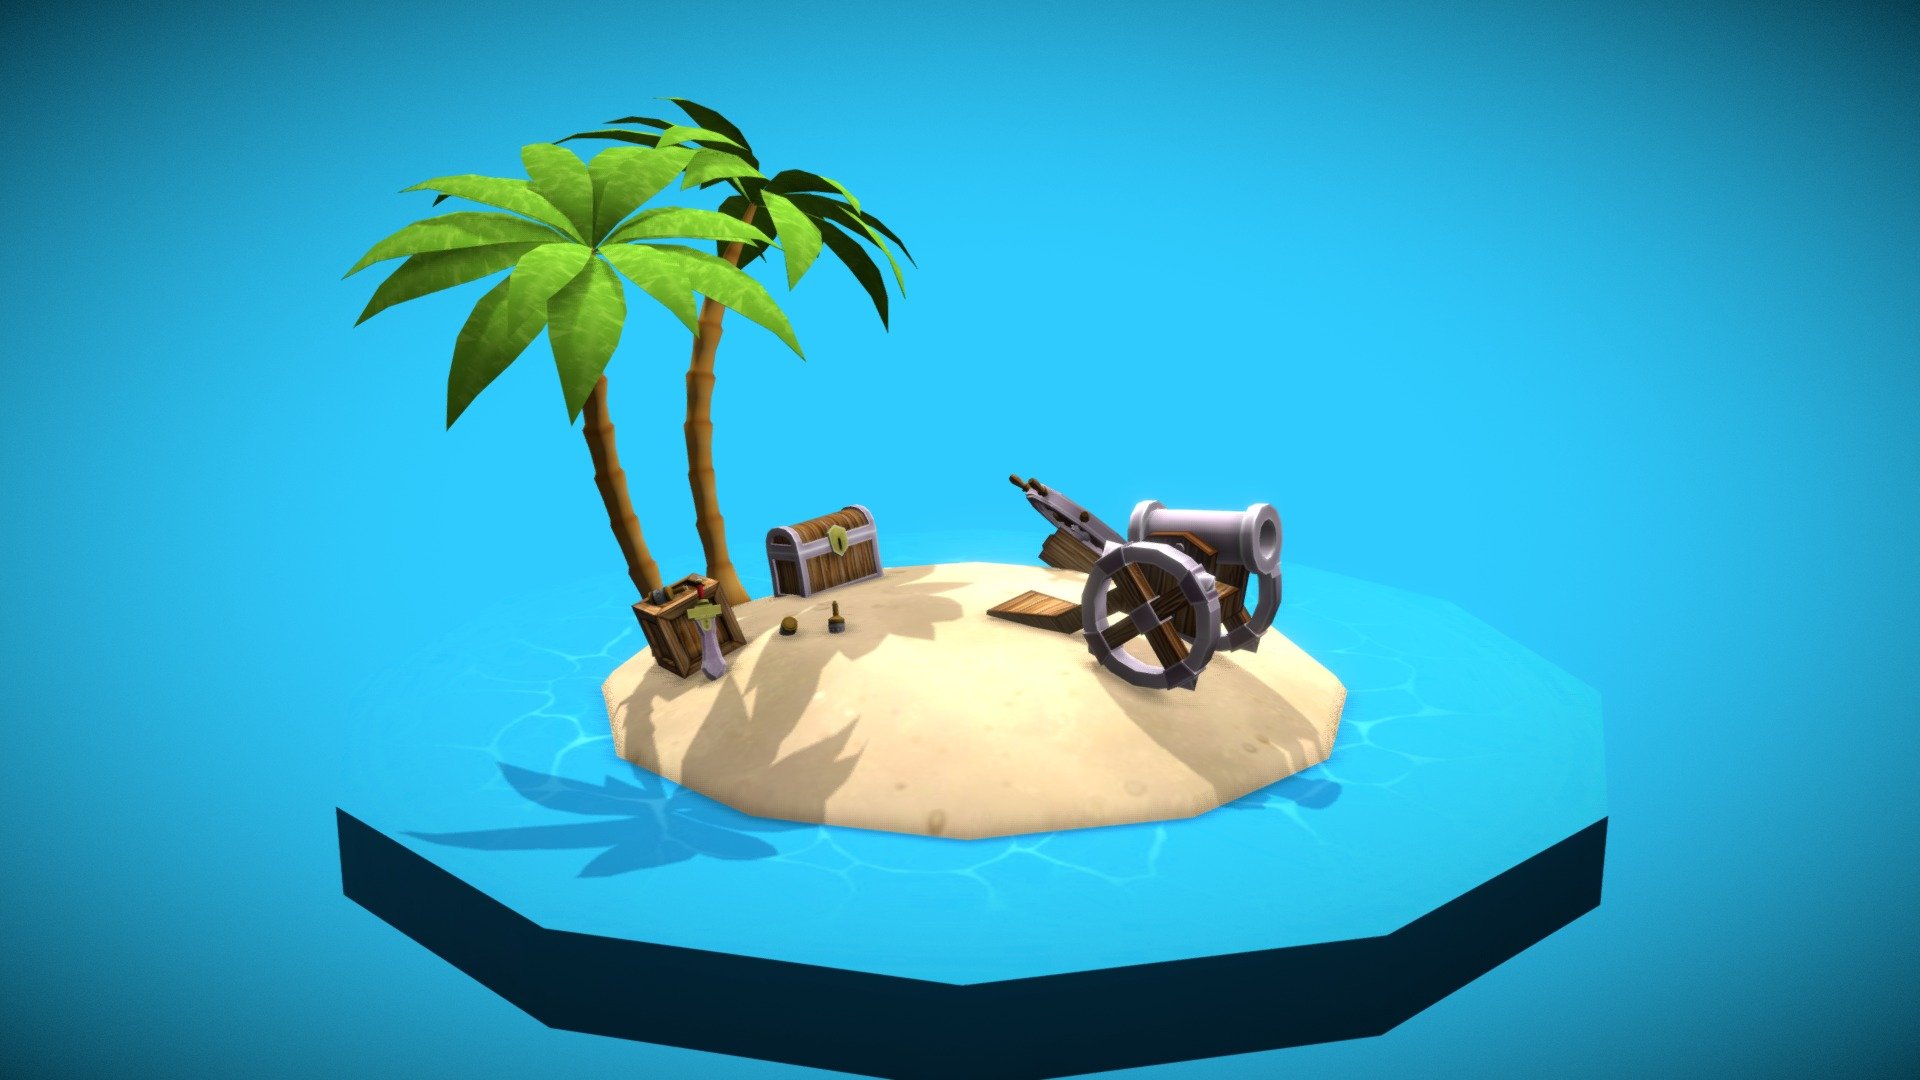 A simple 3D environment of a pirate island that was utilised for delivery in the training of 3DS Max in the Degree program at TAFE Queensland in partnership with University of Canberra, Semester 1 2017 - Pirate Island - 3D model by Joel Bennett (@jcbenne) 3d model